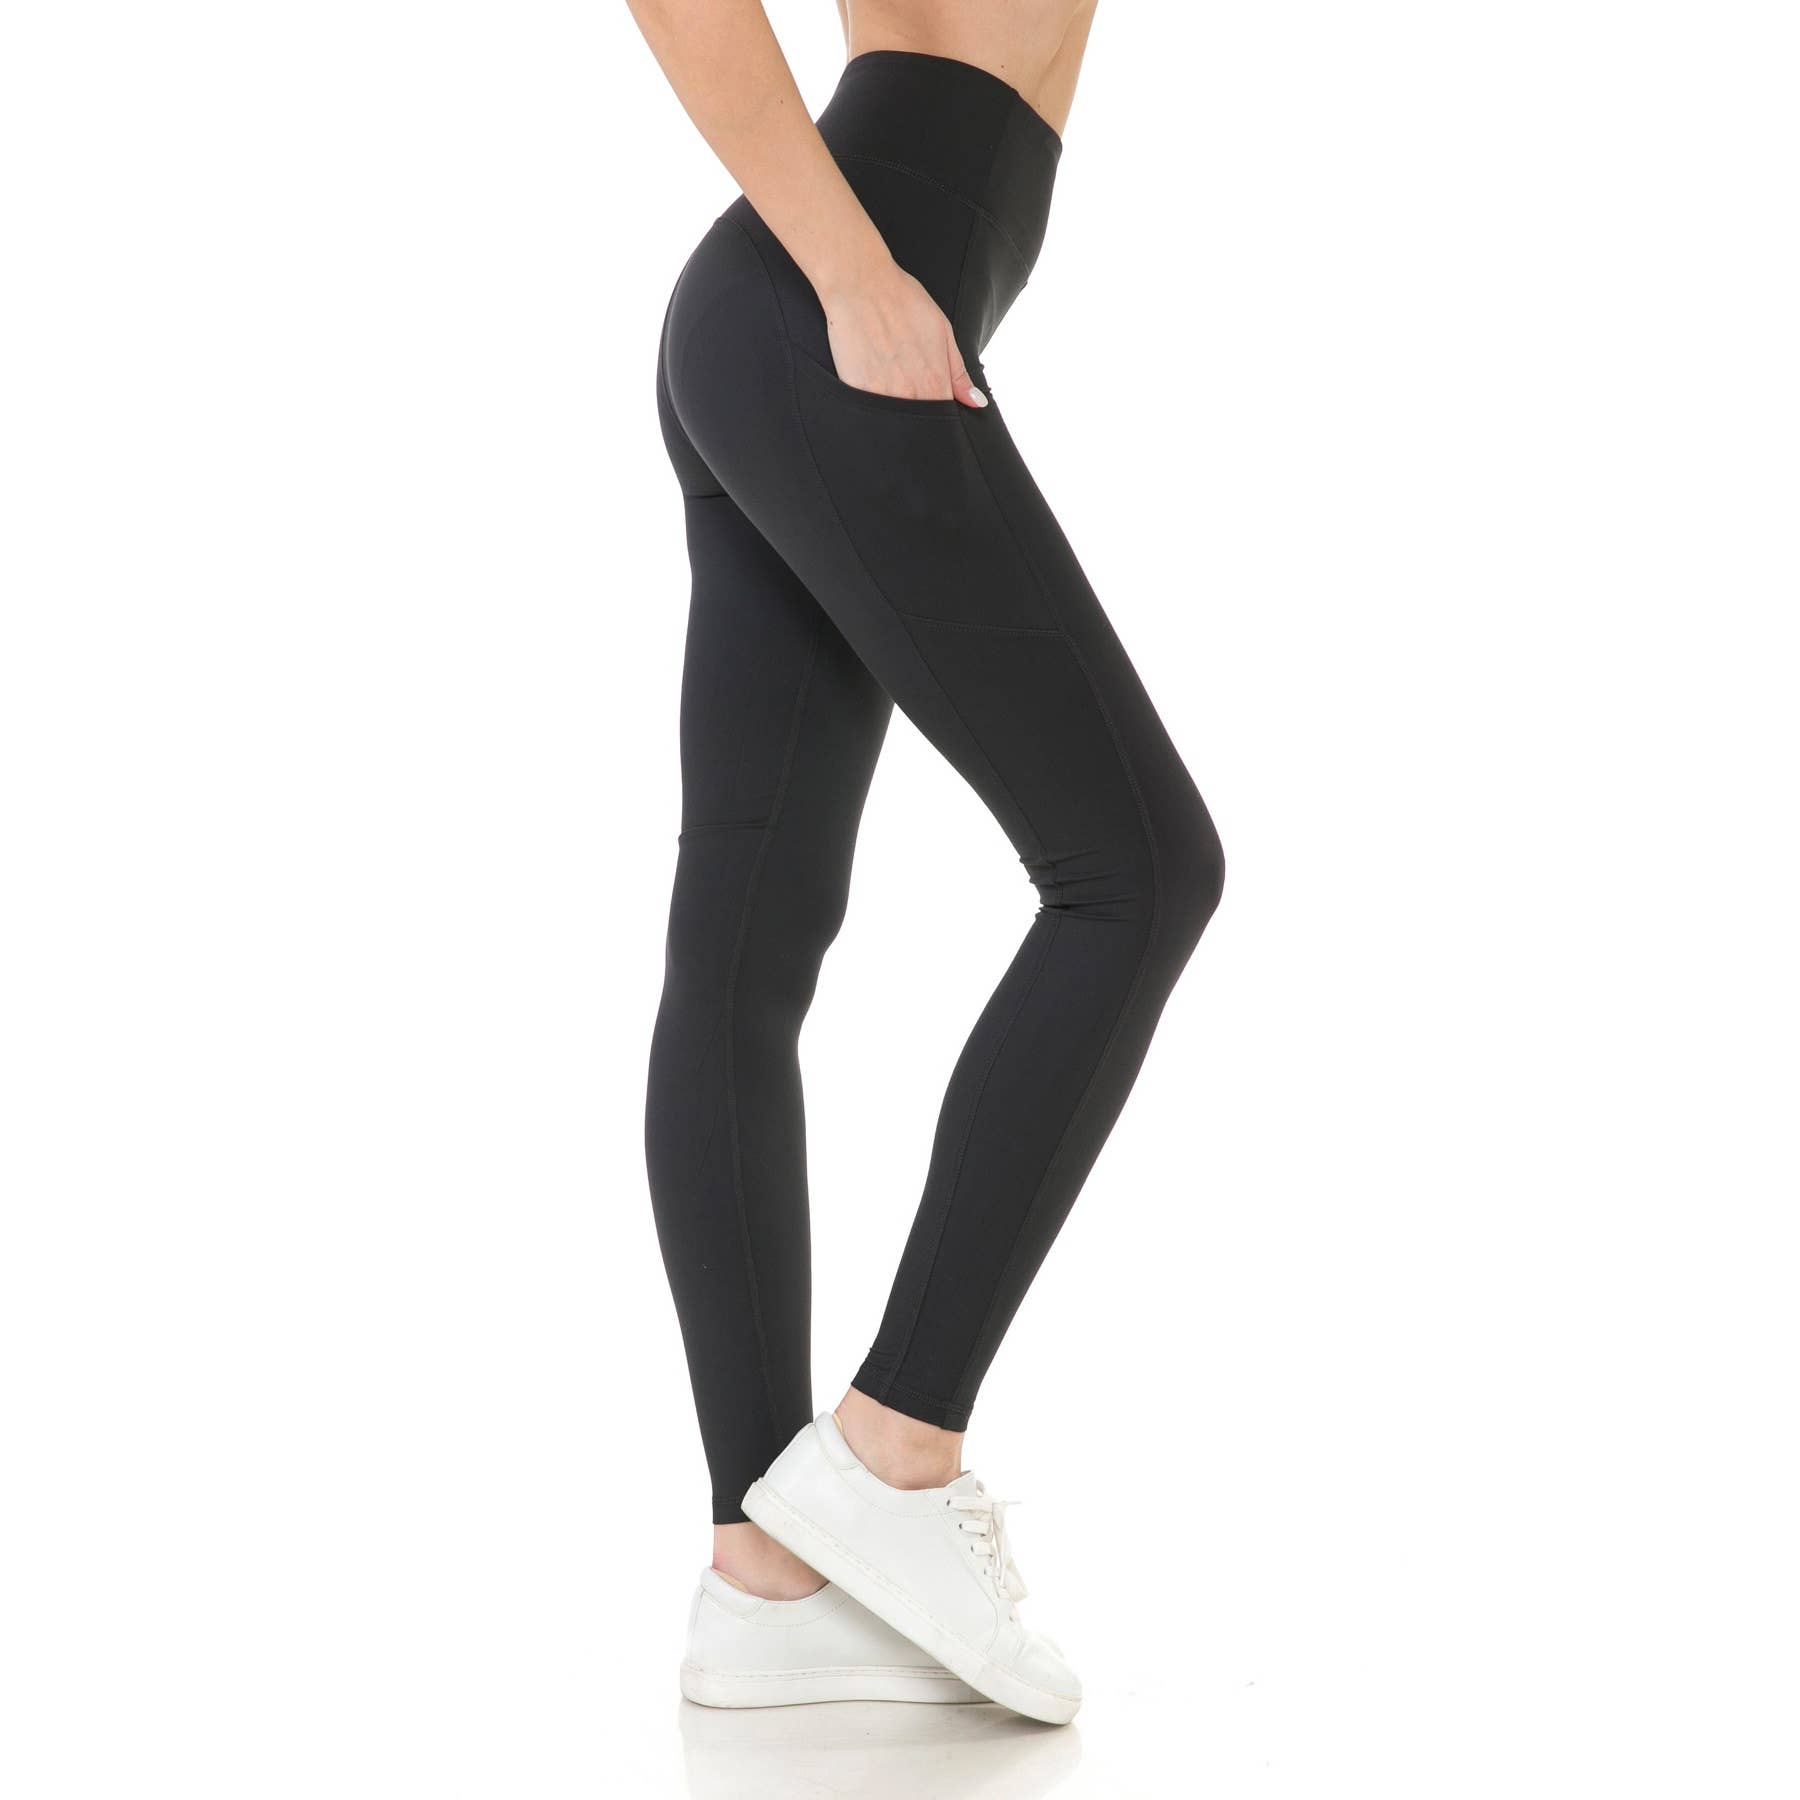 Wholesale Leggings - Wholesale activewear. Family owned, ethical,  inclusive, diverse, sustainable, global fitness brand with local roots in  Brazil. Wholesale workout and gym clothes. Private labeling.